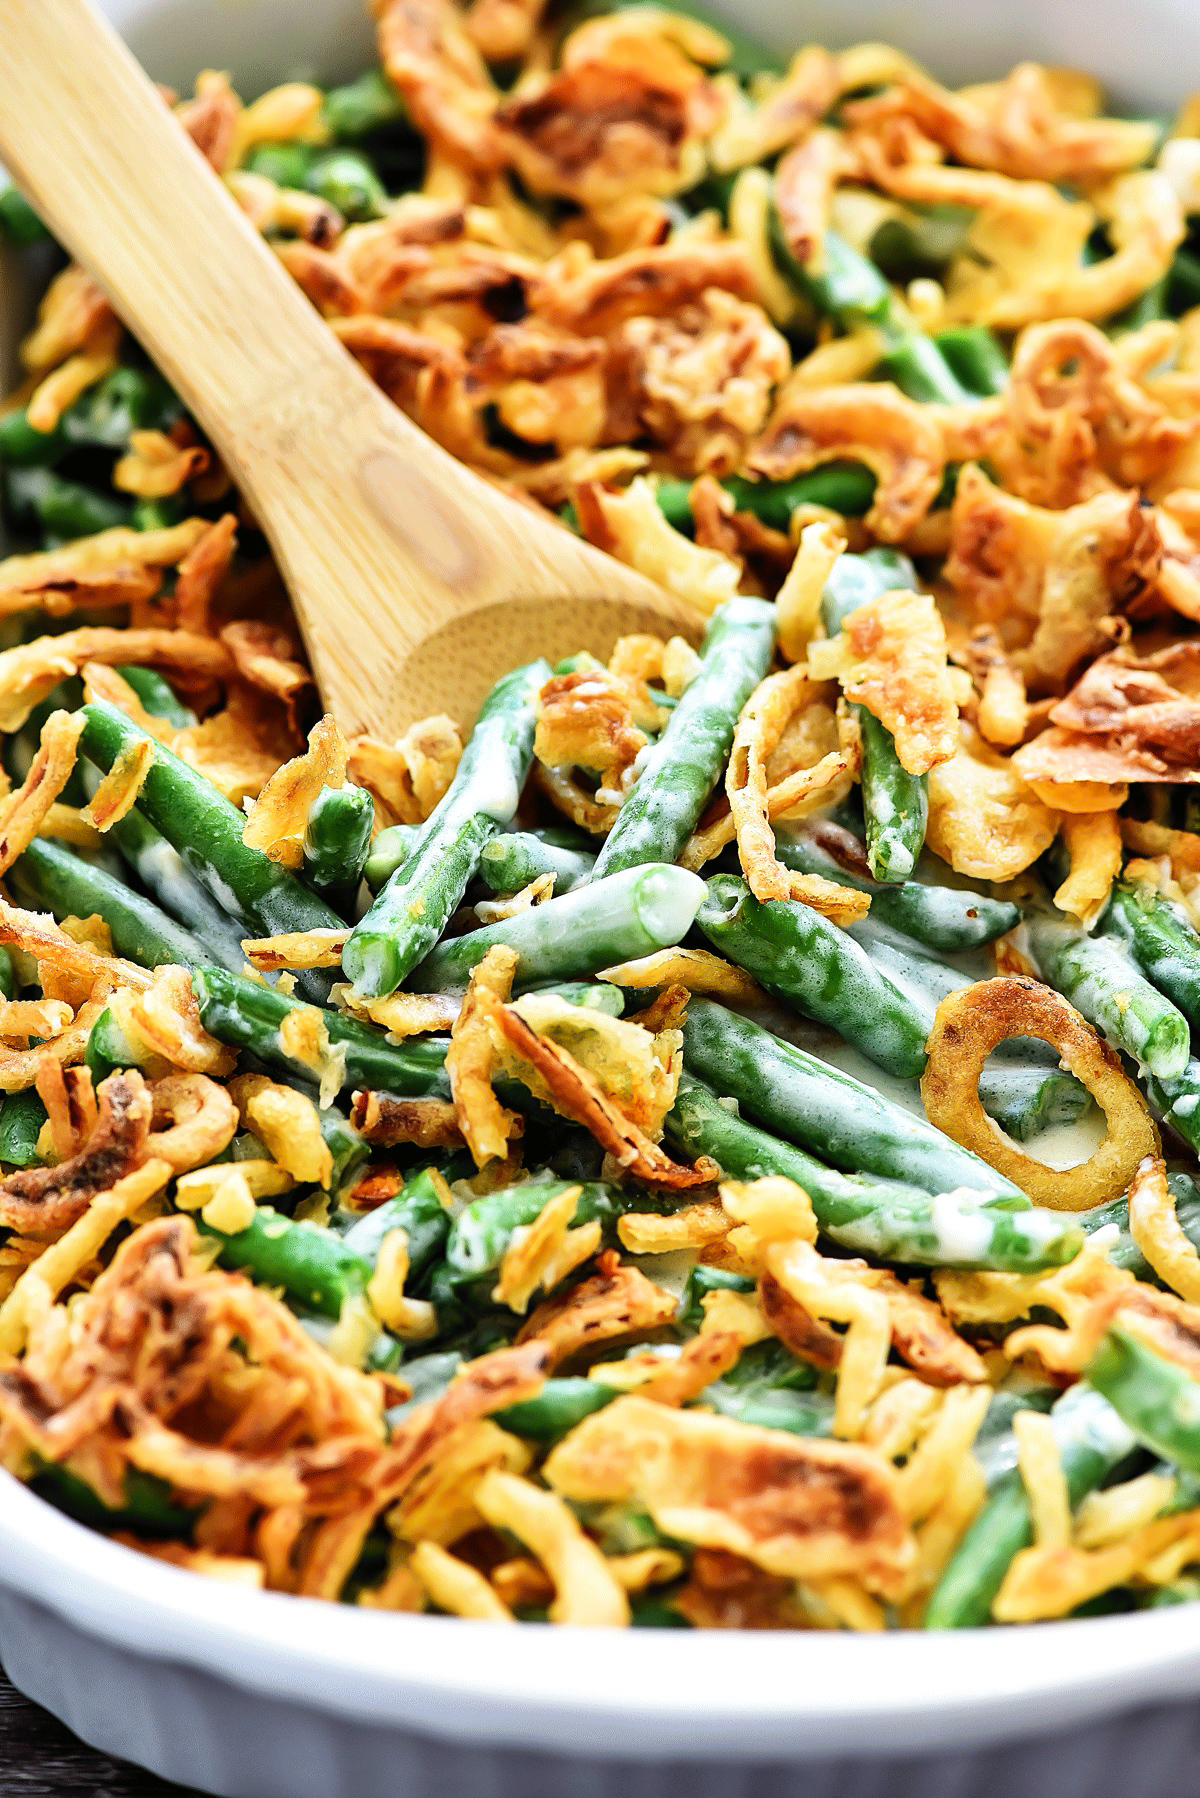 15 Ways How to Make Perfect Green Bean Casserole with Canned Green ...